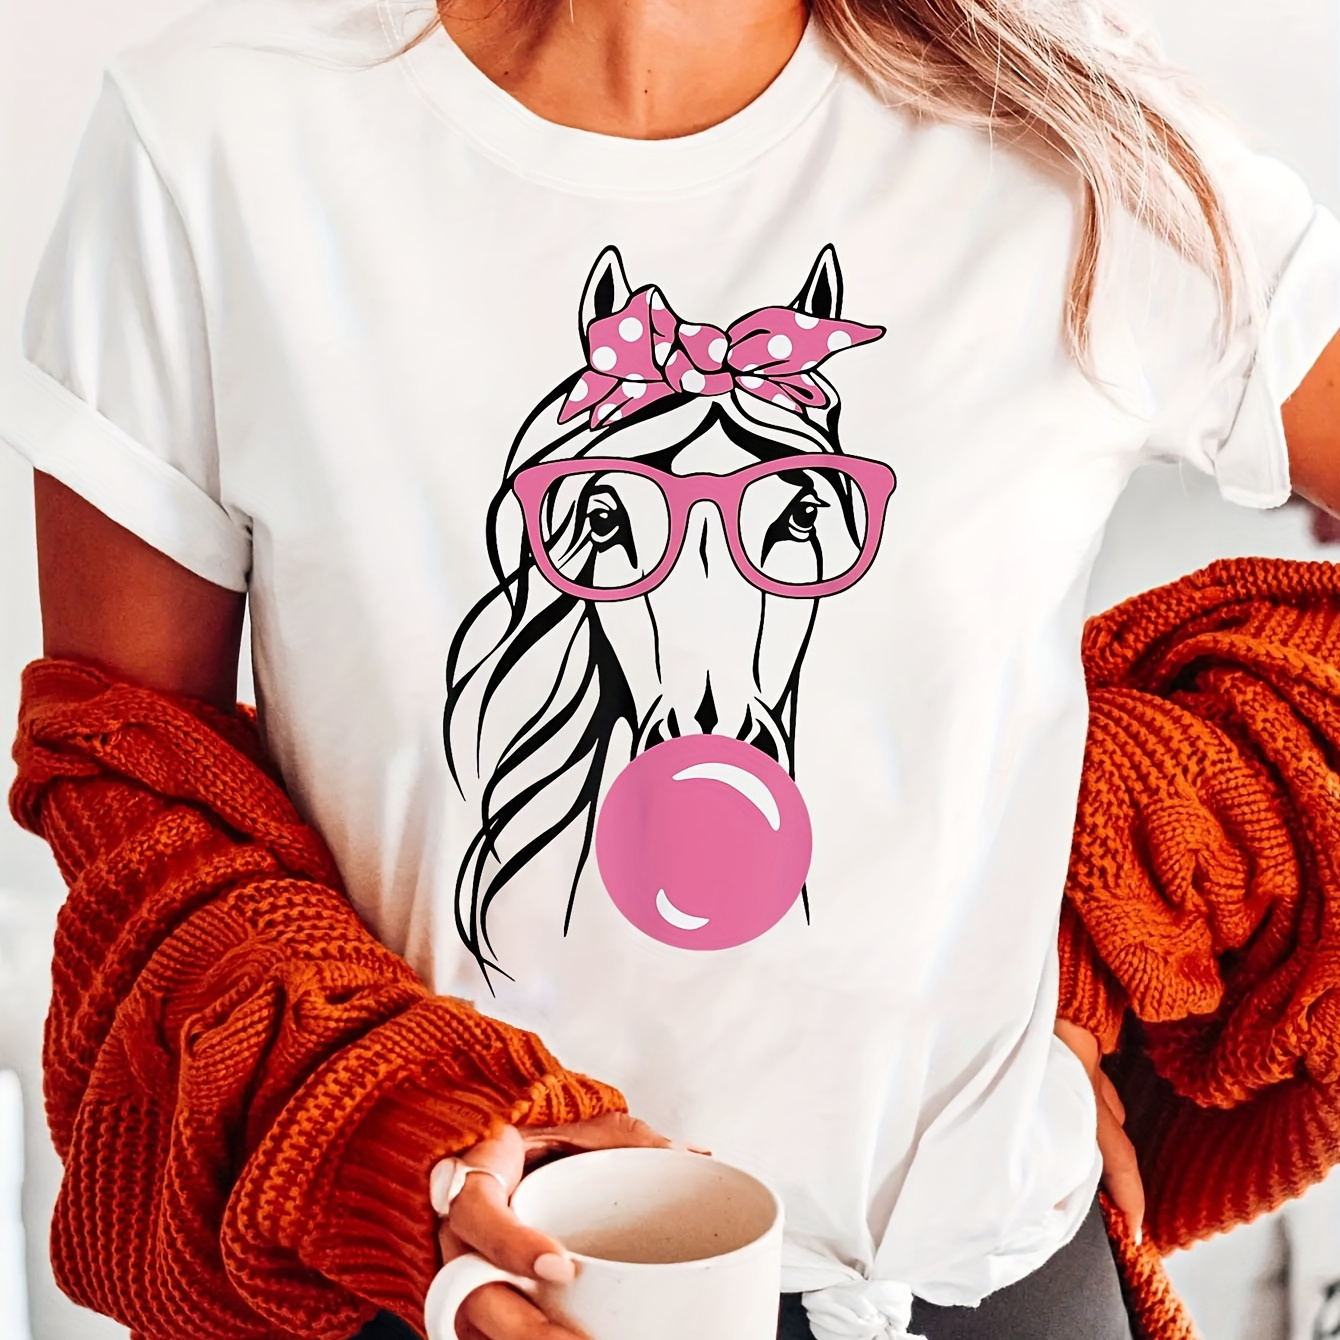 

Horse Print Crew Neck T-shirt, Short Sleeve Casual Top For Summer & Spring, Women's Clothing